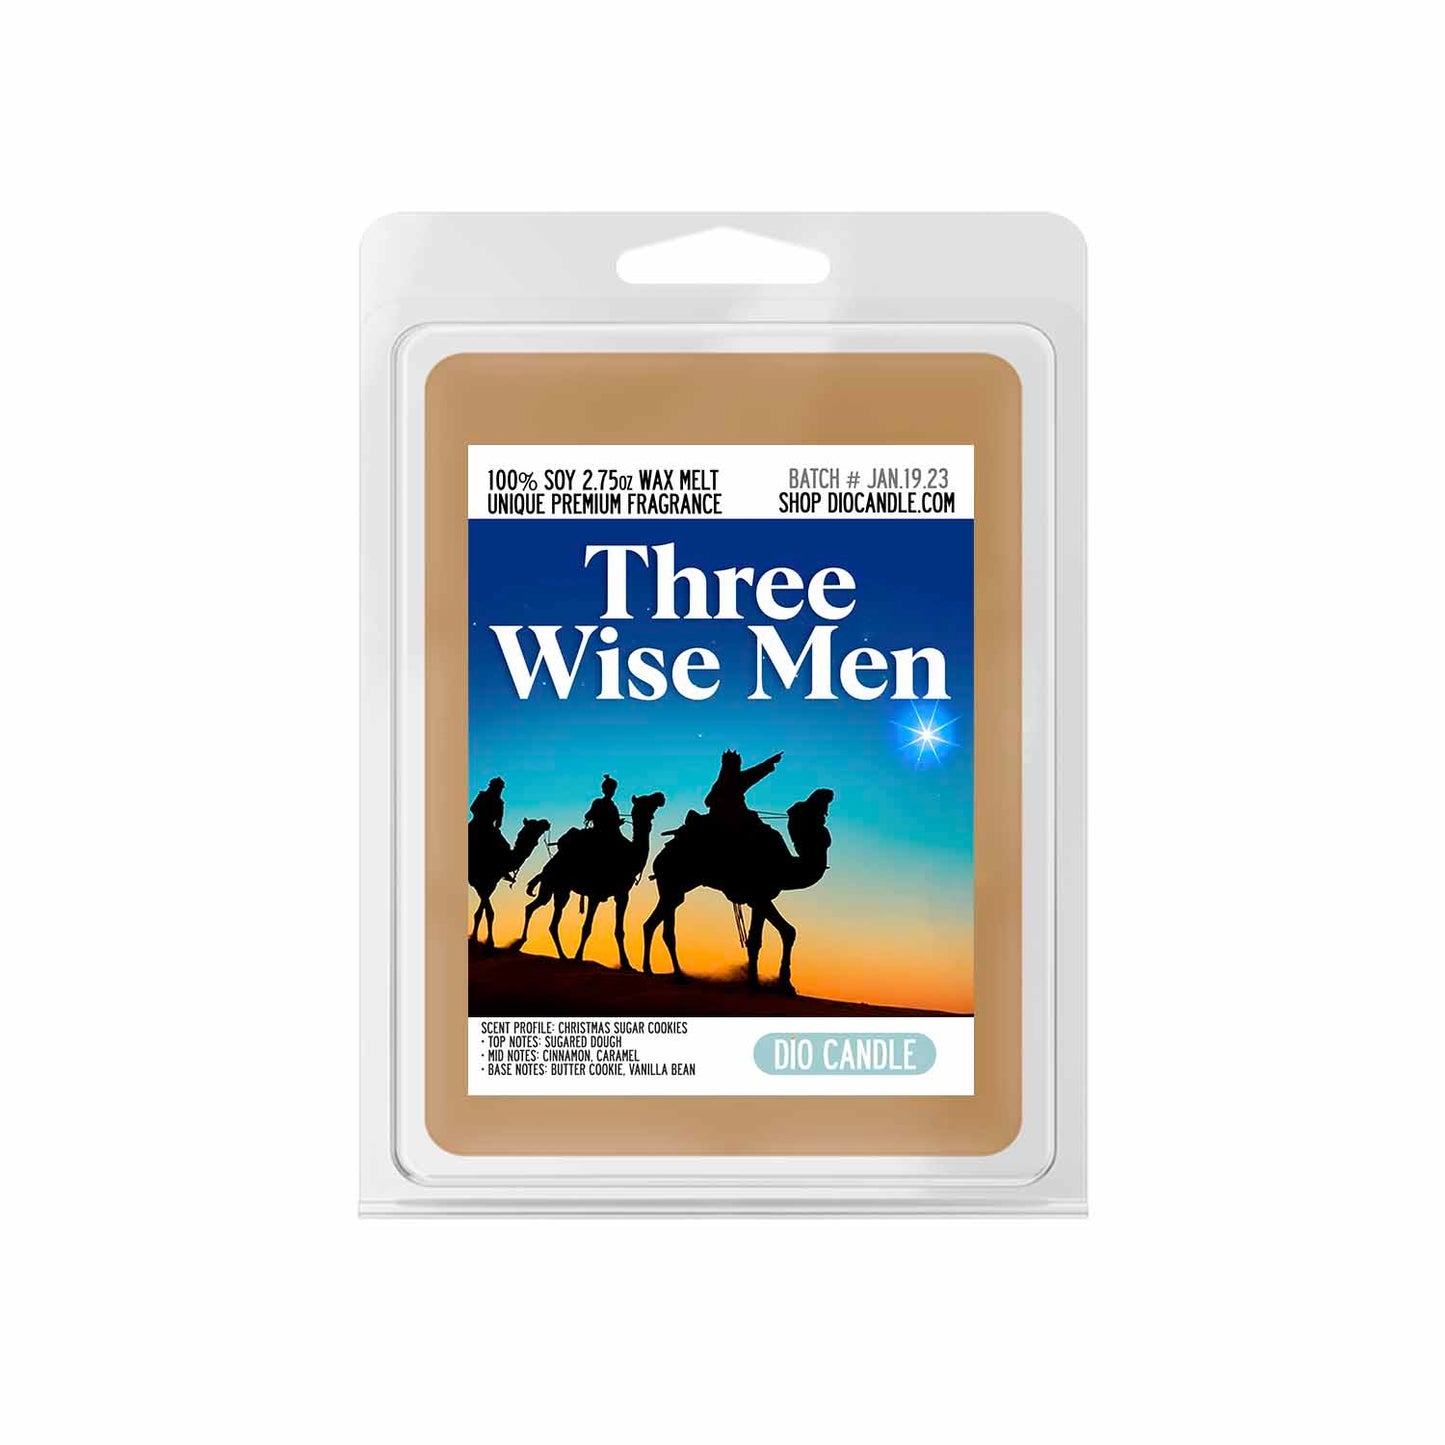 Three Wise Men Candle